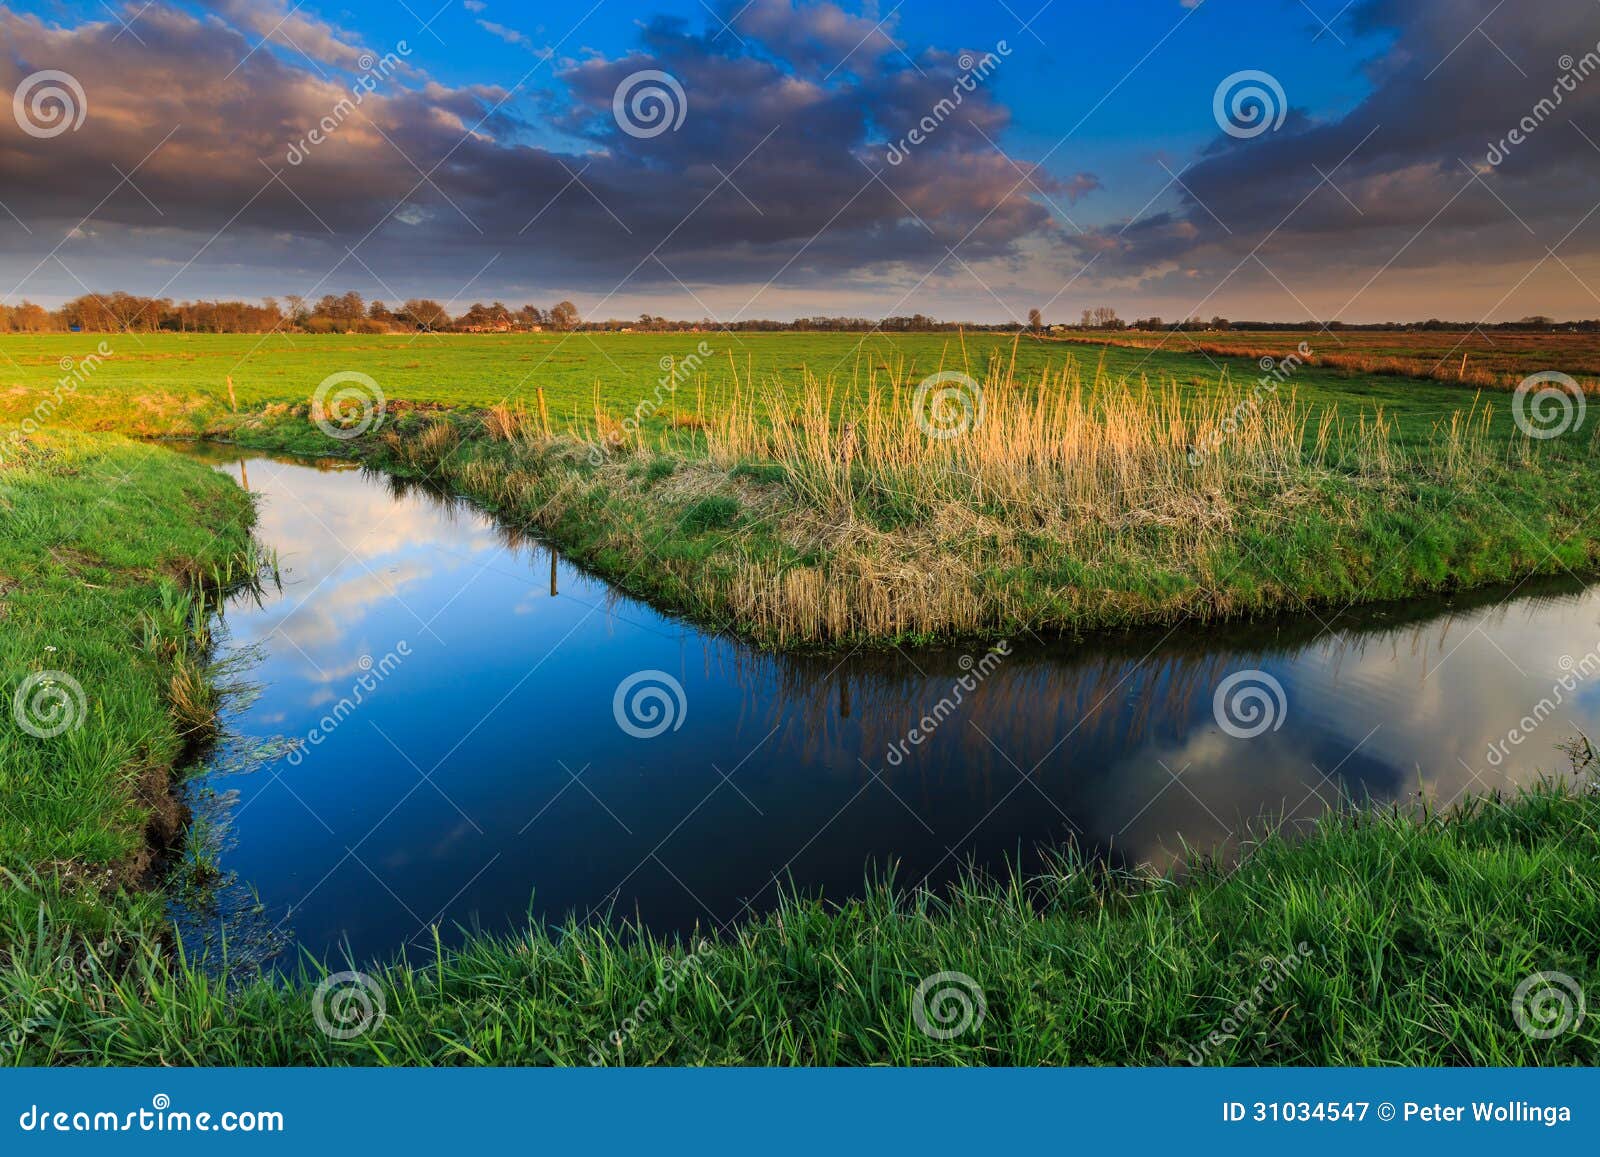 grassland and ditch at sunset